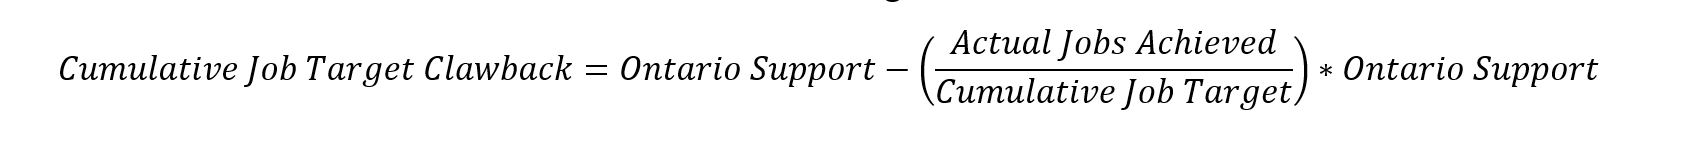 Cumulative Job Target Clawback is calculated using the following formula. Ontario Support minus open parenthesis Actual Jobs Achieved divided by Cumulative Job Target close parenthesis multiplied by Ontario Support. 